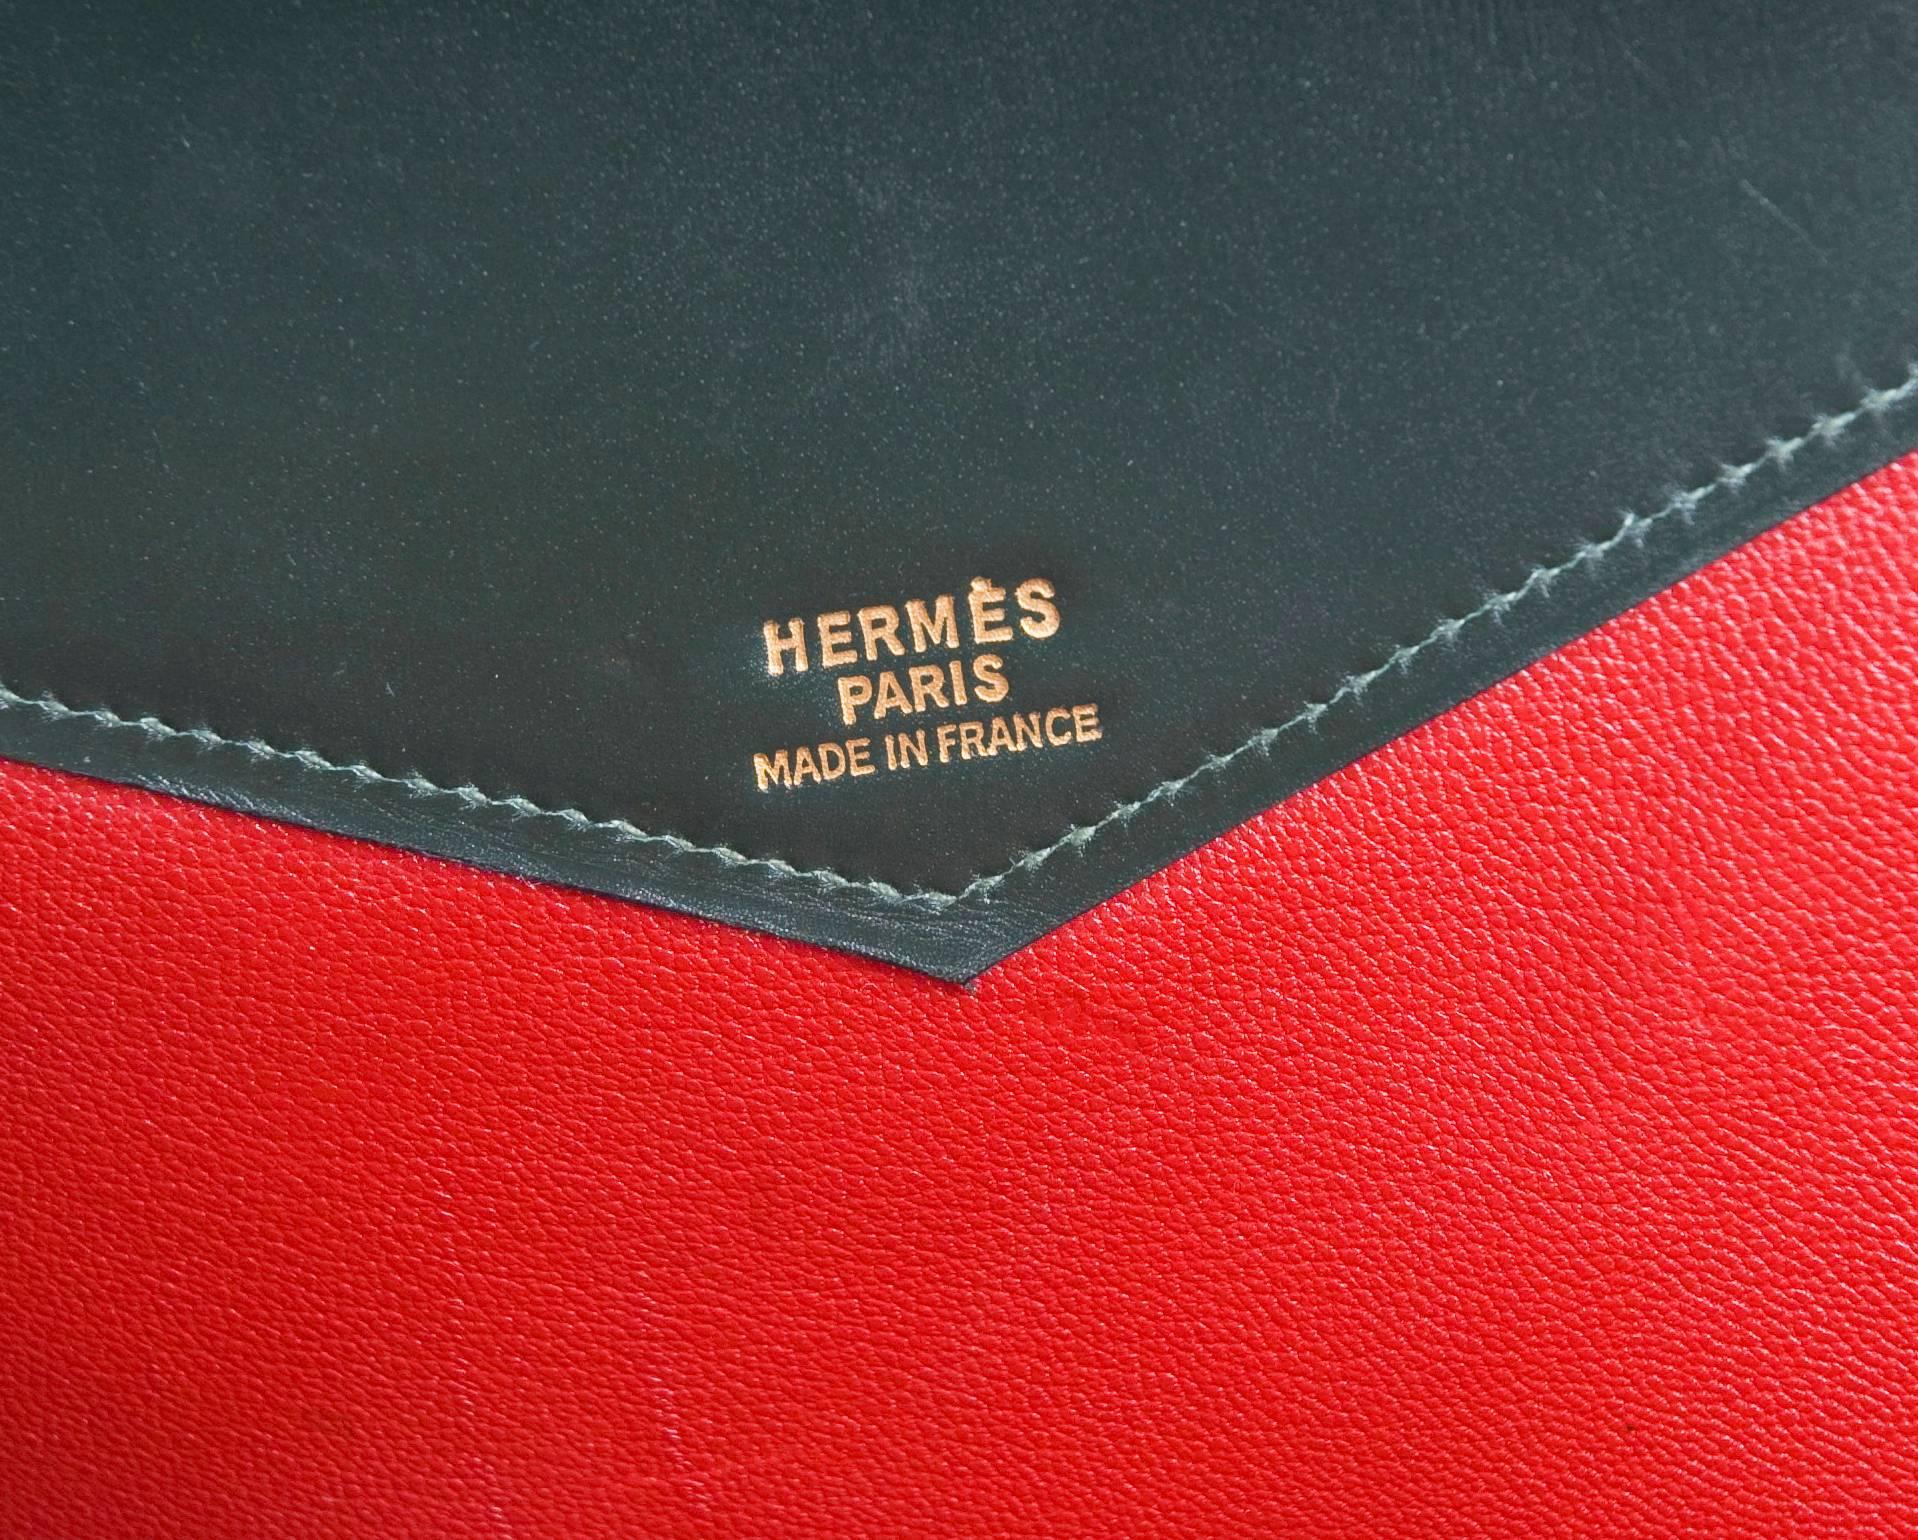 Vintage Rare Hermes Himalayan Moniker Purse from 1982 For Sale 4